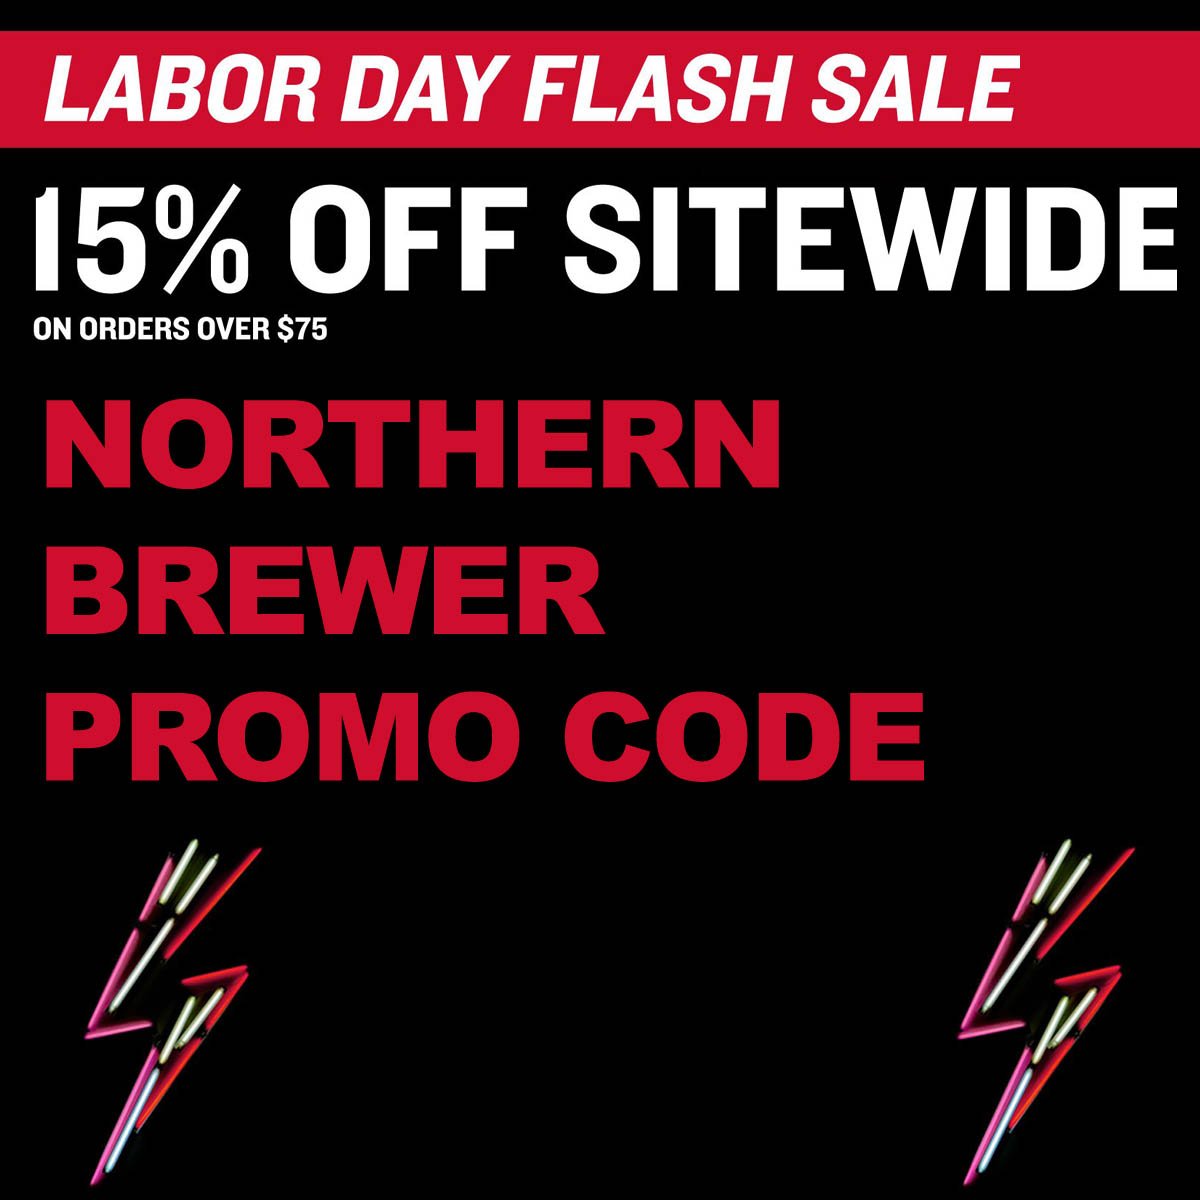 NorthernBrewer.com Labor Day Promo Code for 2019